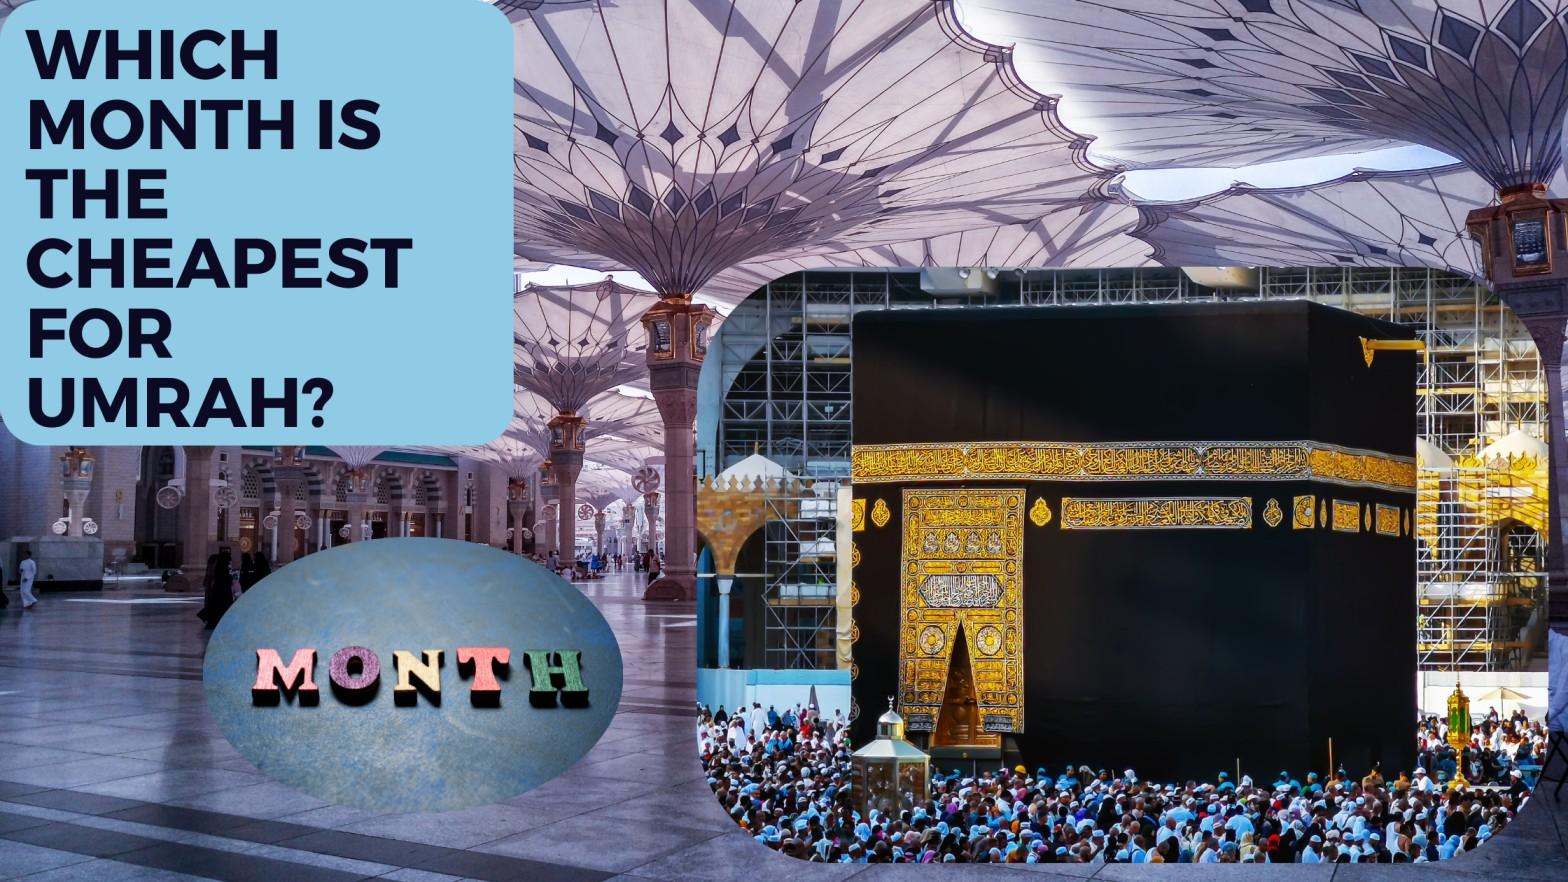 Which month is the cheapest for Umrah?